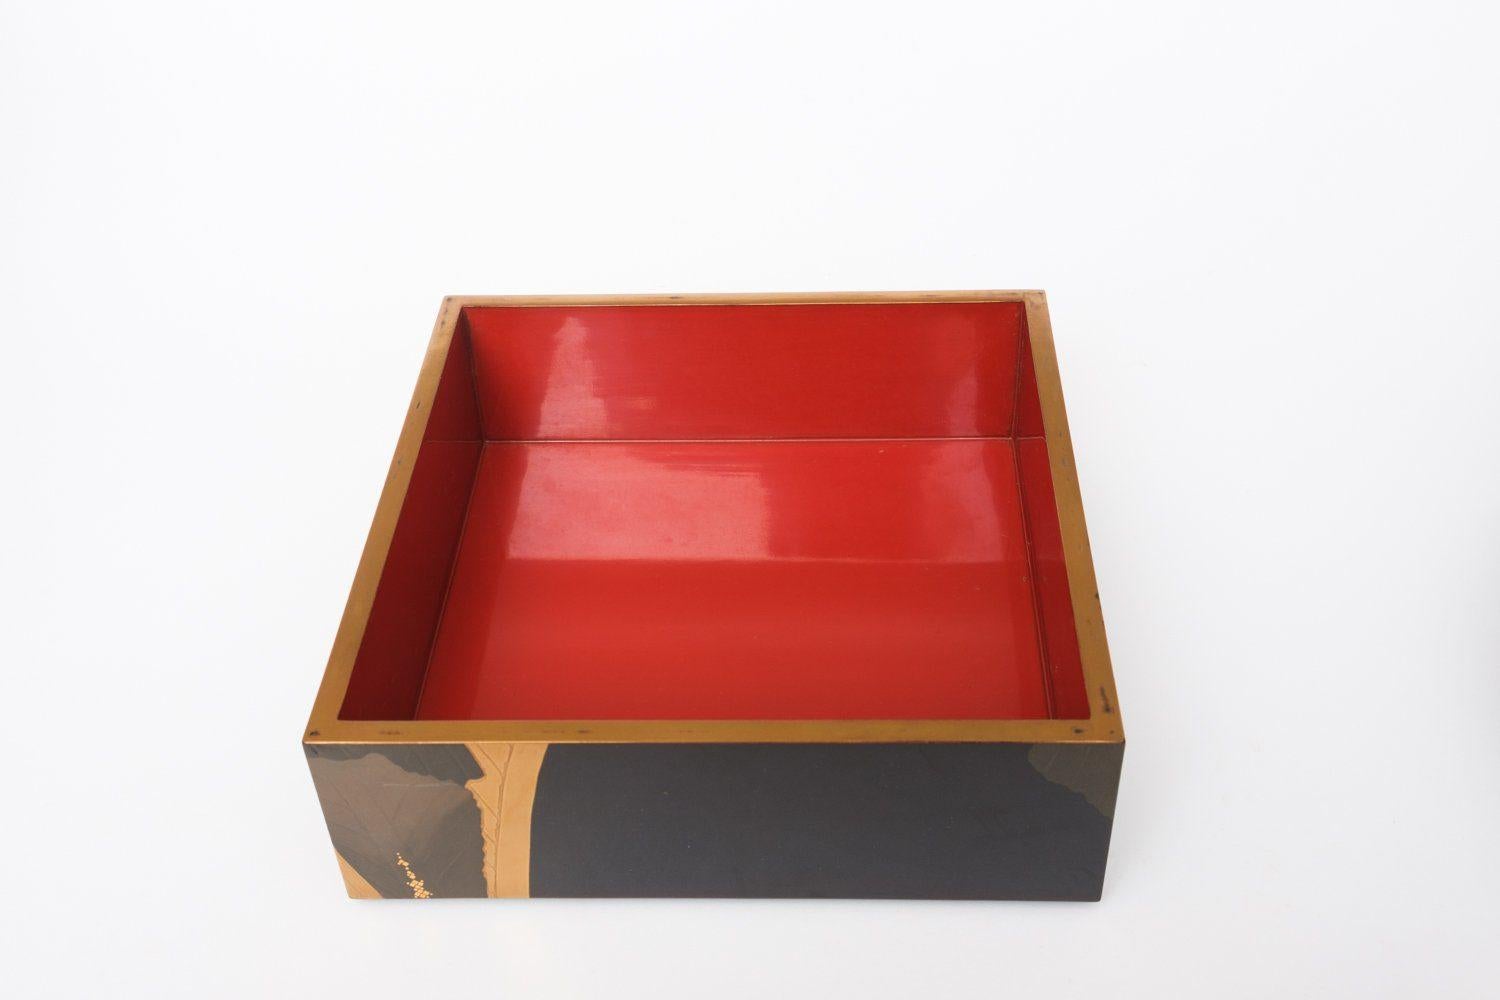 Japanese lacquered 5-tiered jûbako 重箱 (picnic box) with banana leaf design For Sale 9